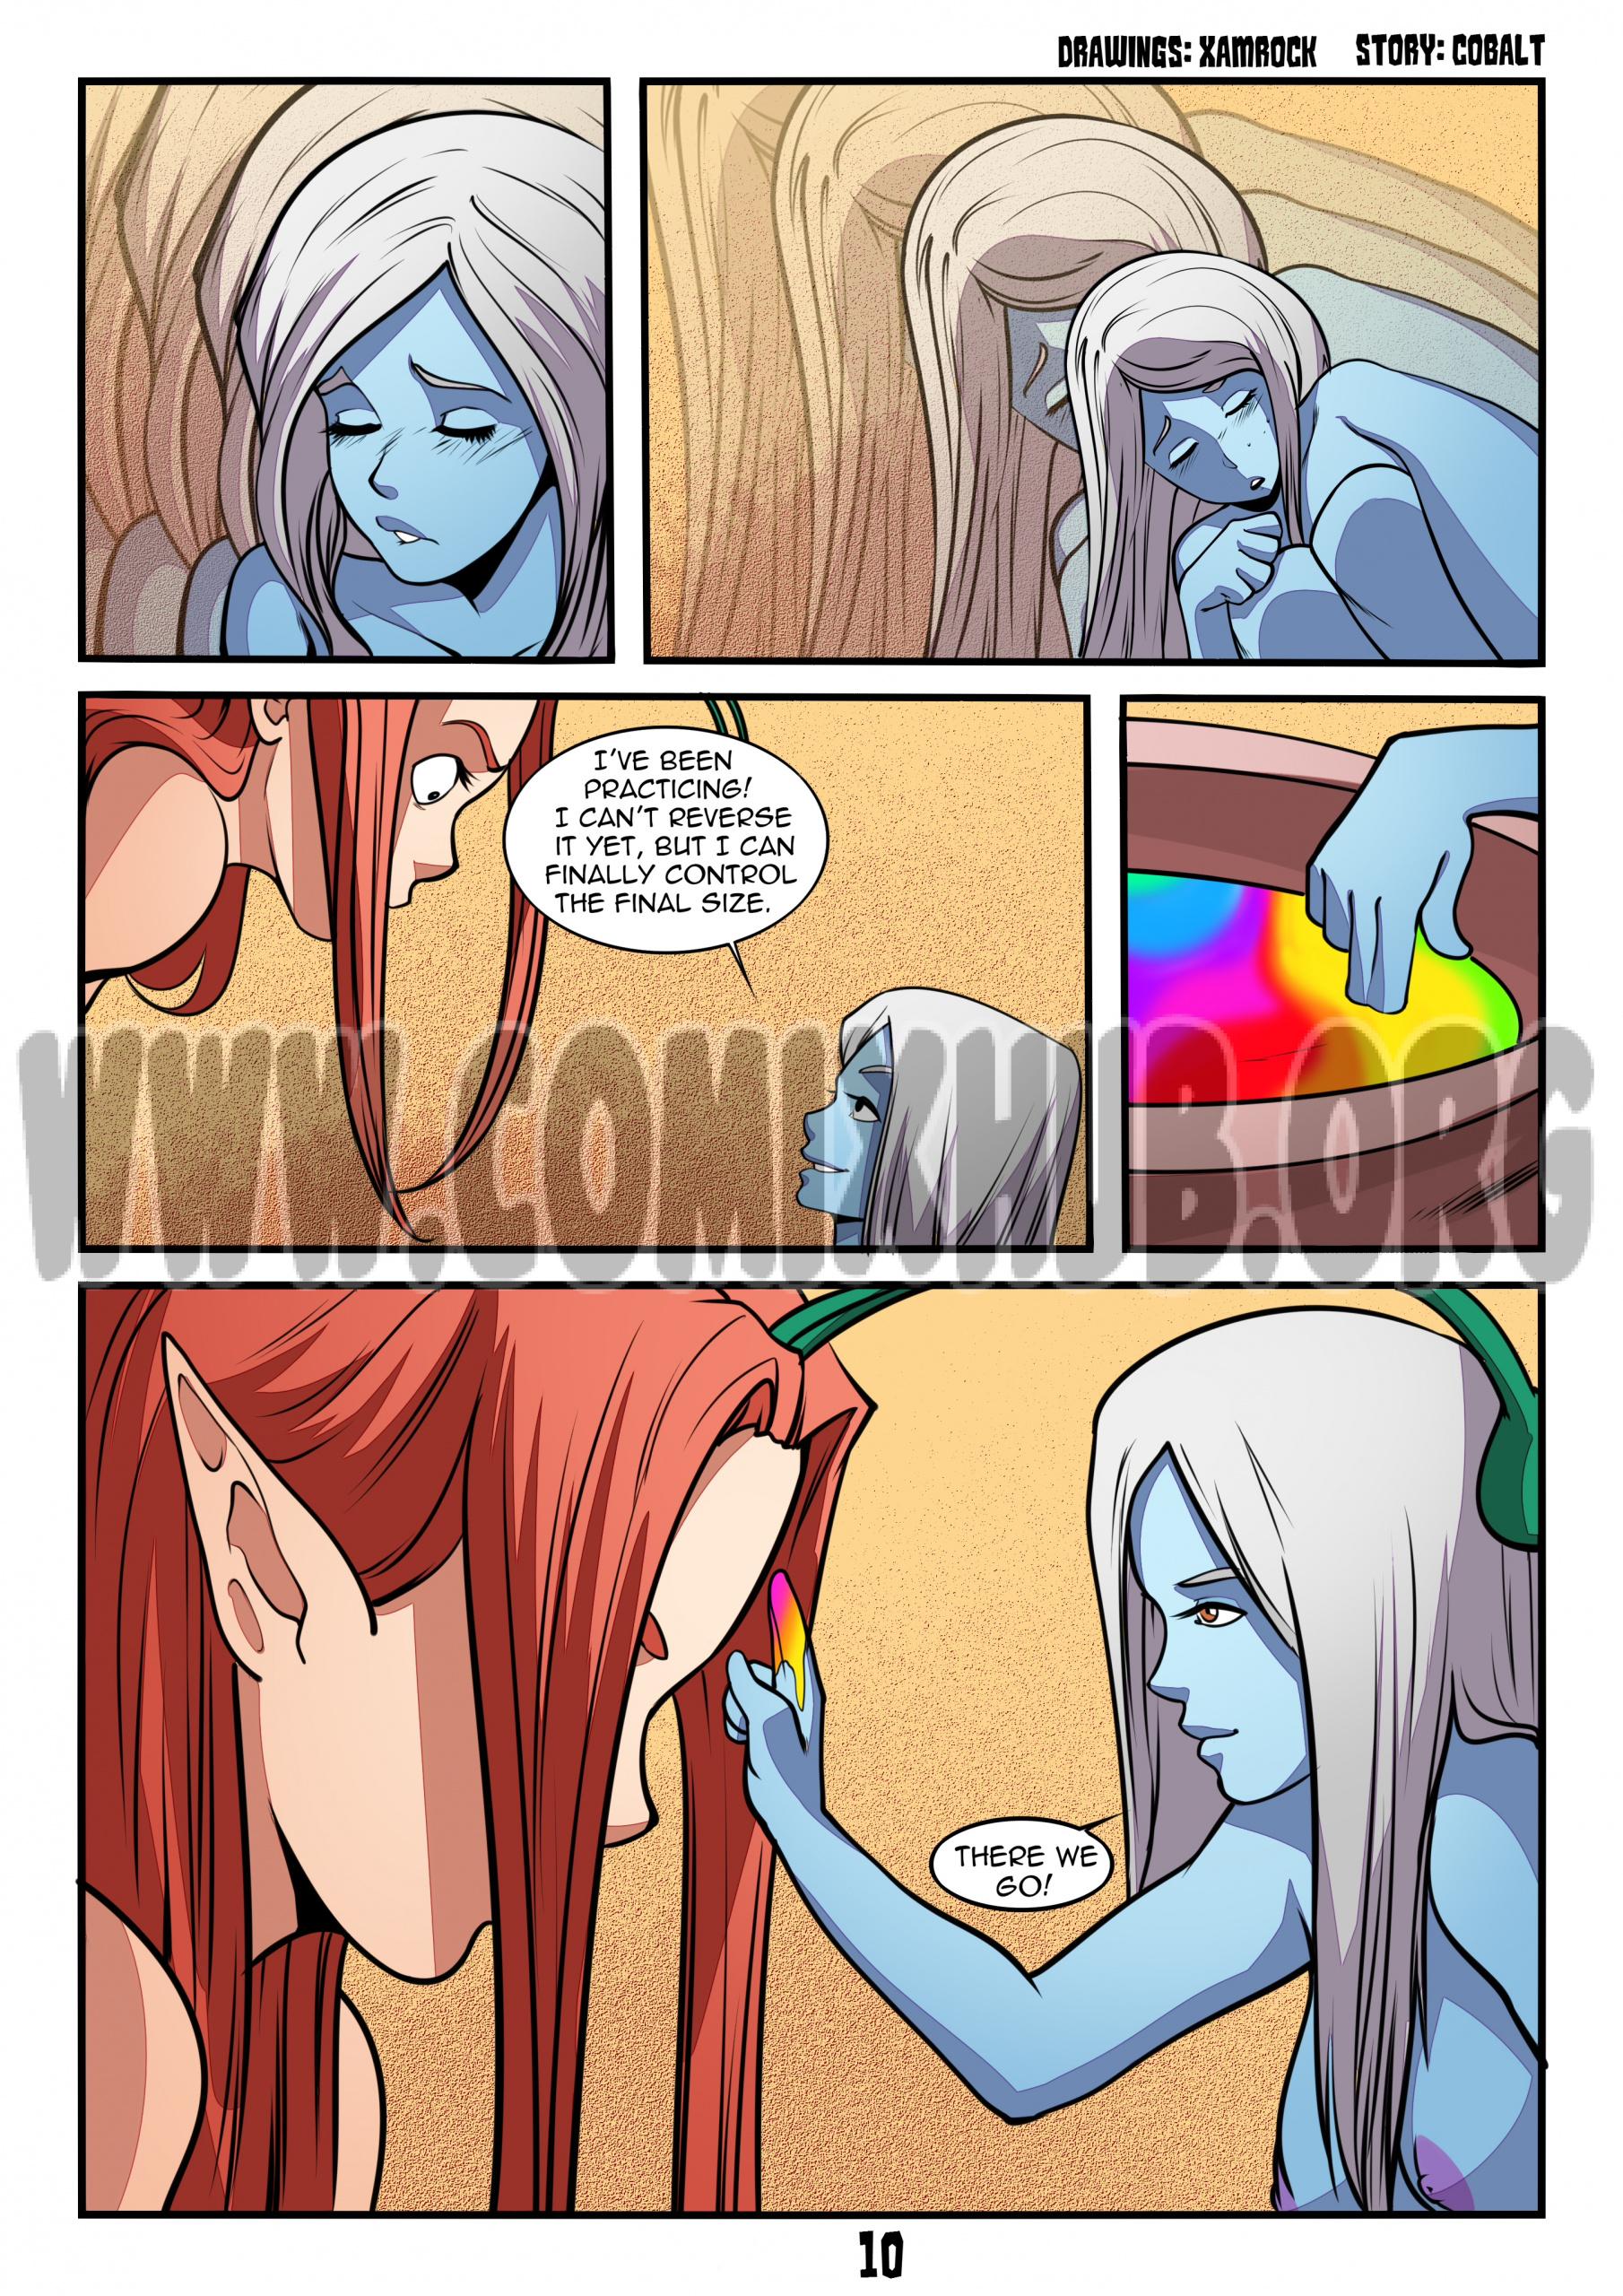 From High Above Issue 2 porn comics Lesbians, Fantasy